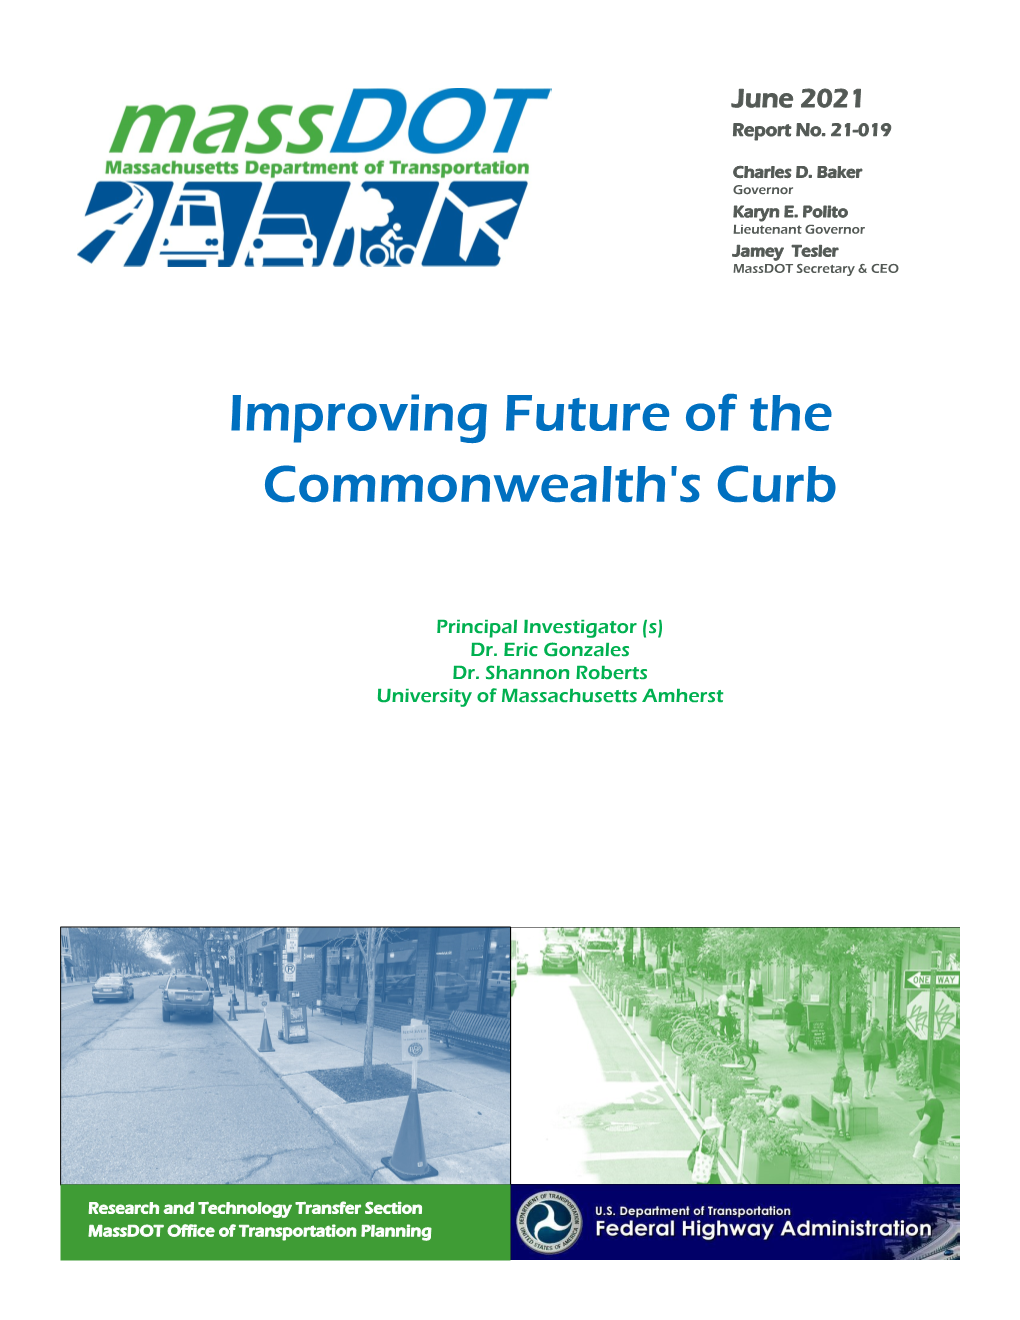 Improving Future of the Commonwealth's Curb